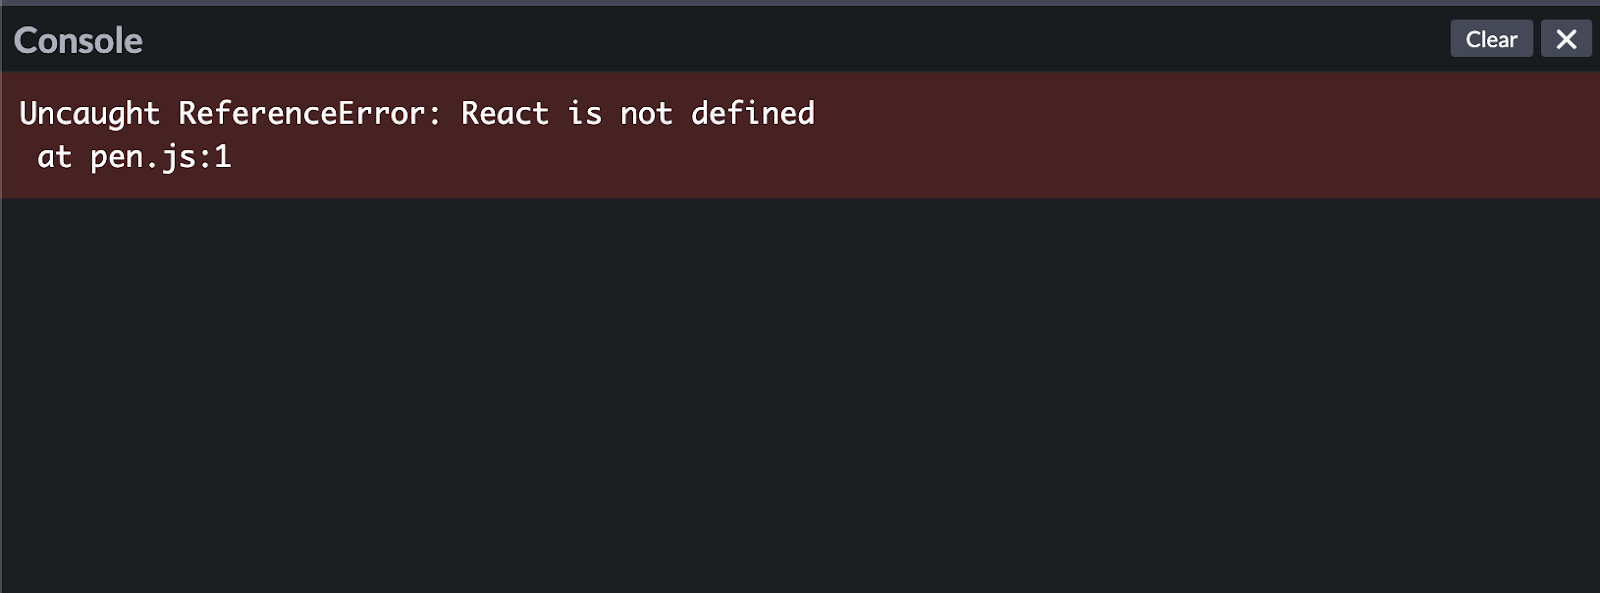 The console has an error message that reads, Uncaught ReferenceError: React is not defined at pen.js:1.